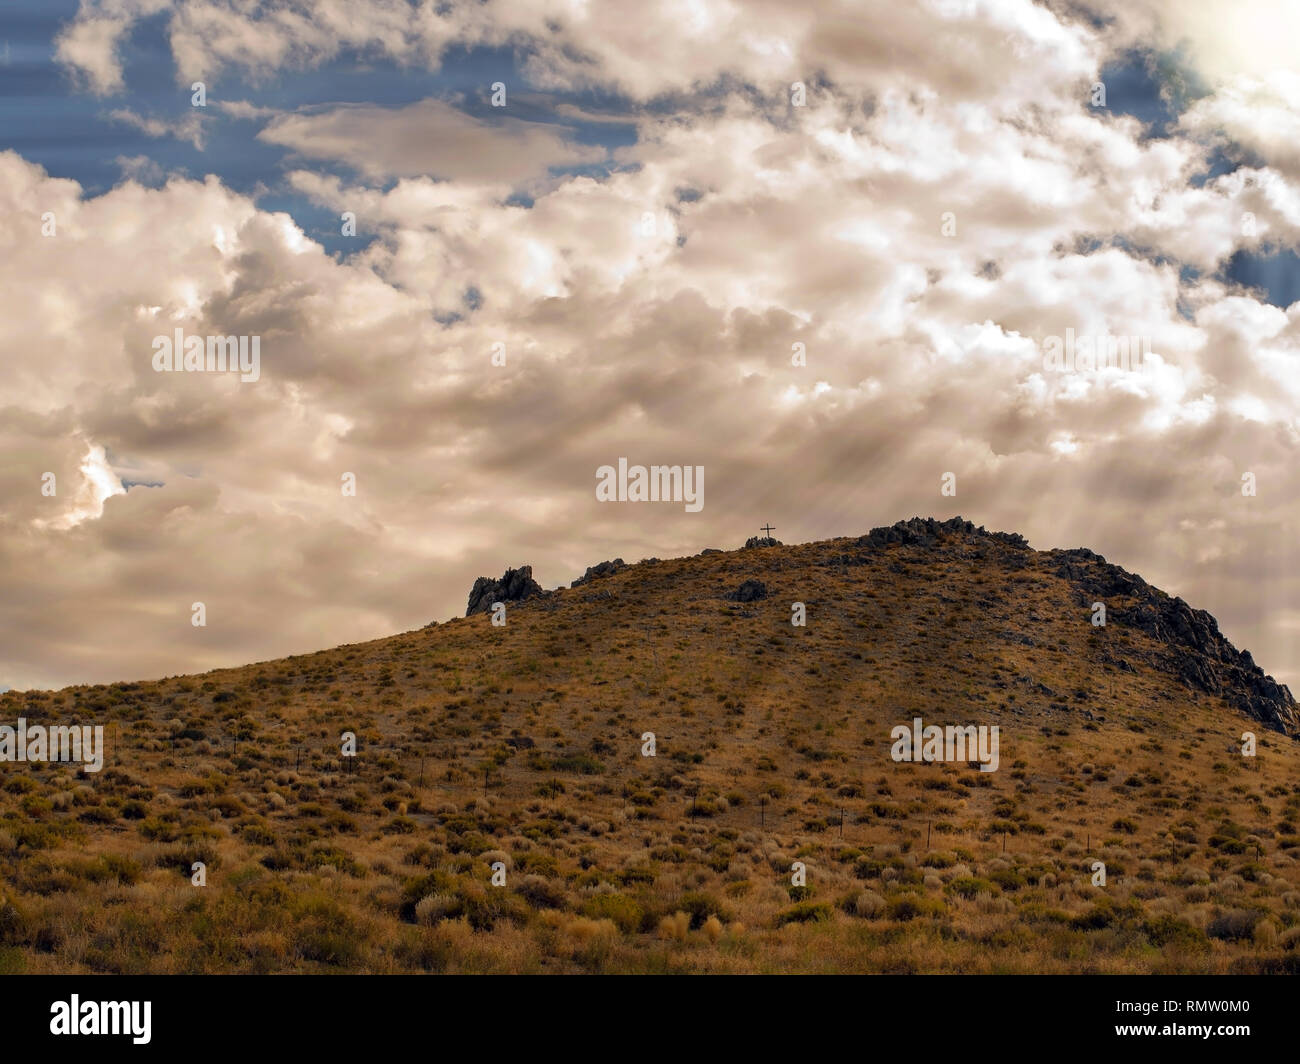 Religious cross on a sagebrush covered hill in the Nevada desert landscape photograph. Stock Photo